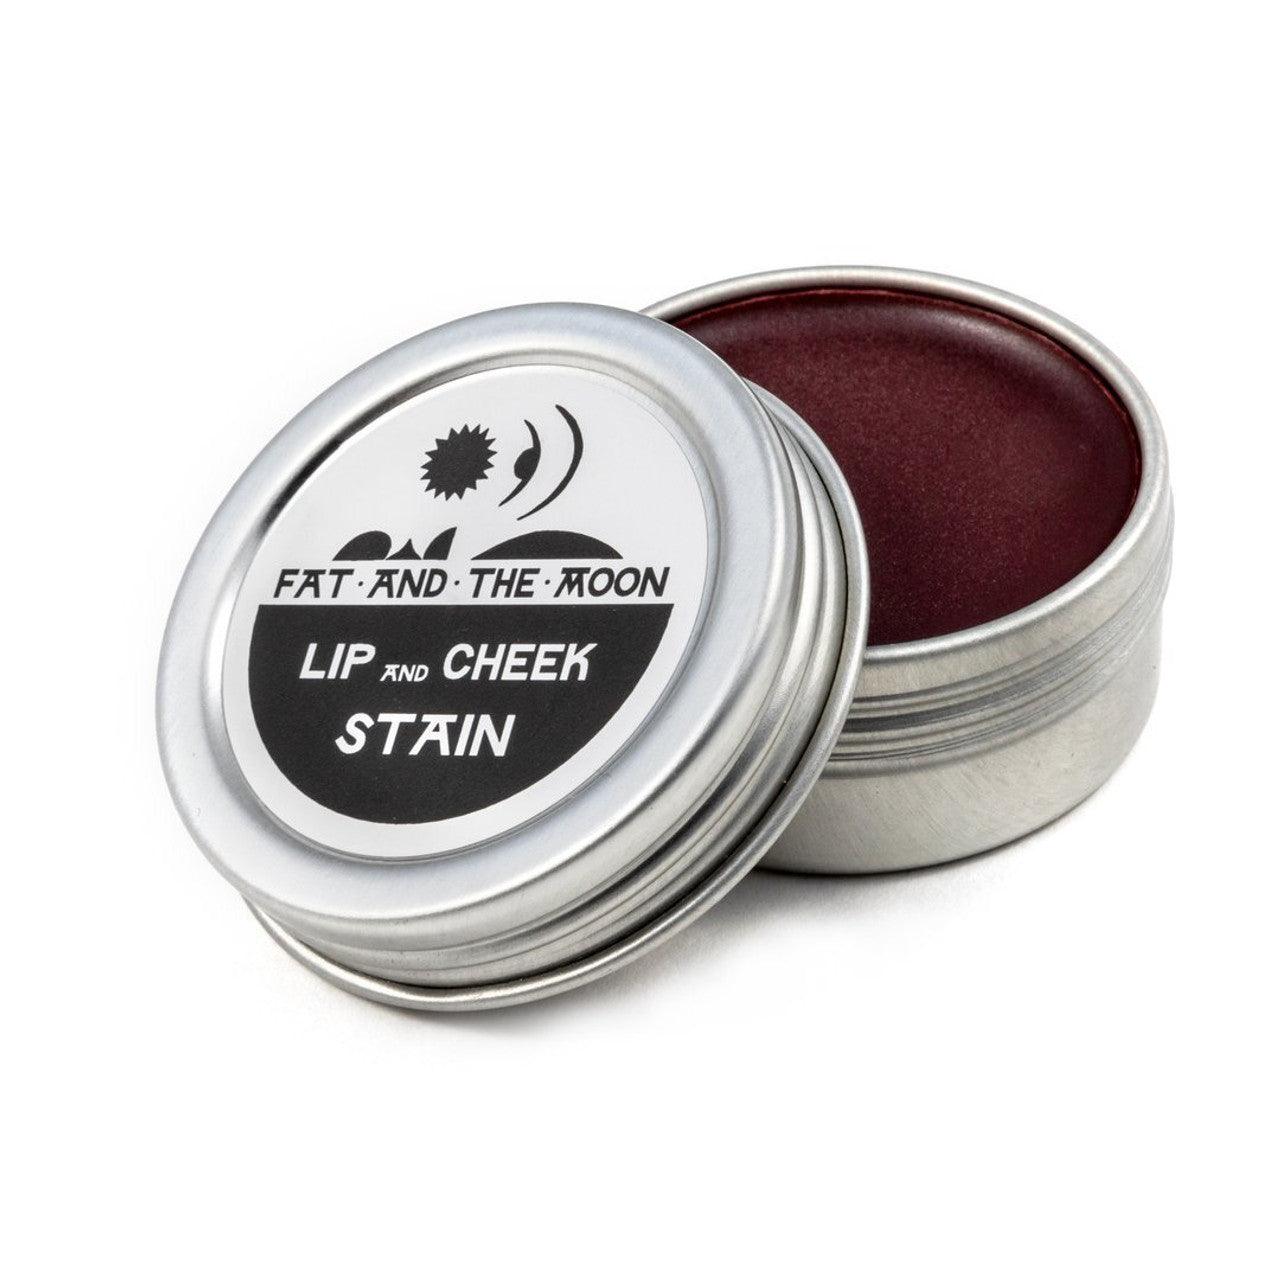 Lip and Cheek Stain - Bluecorn Candles